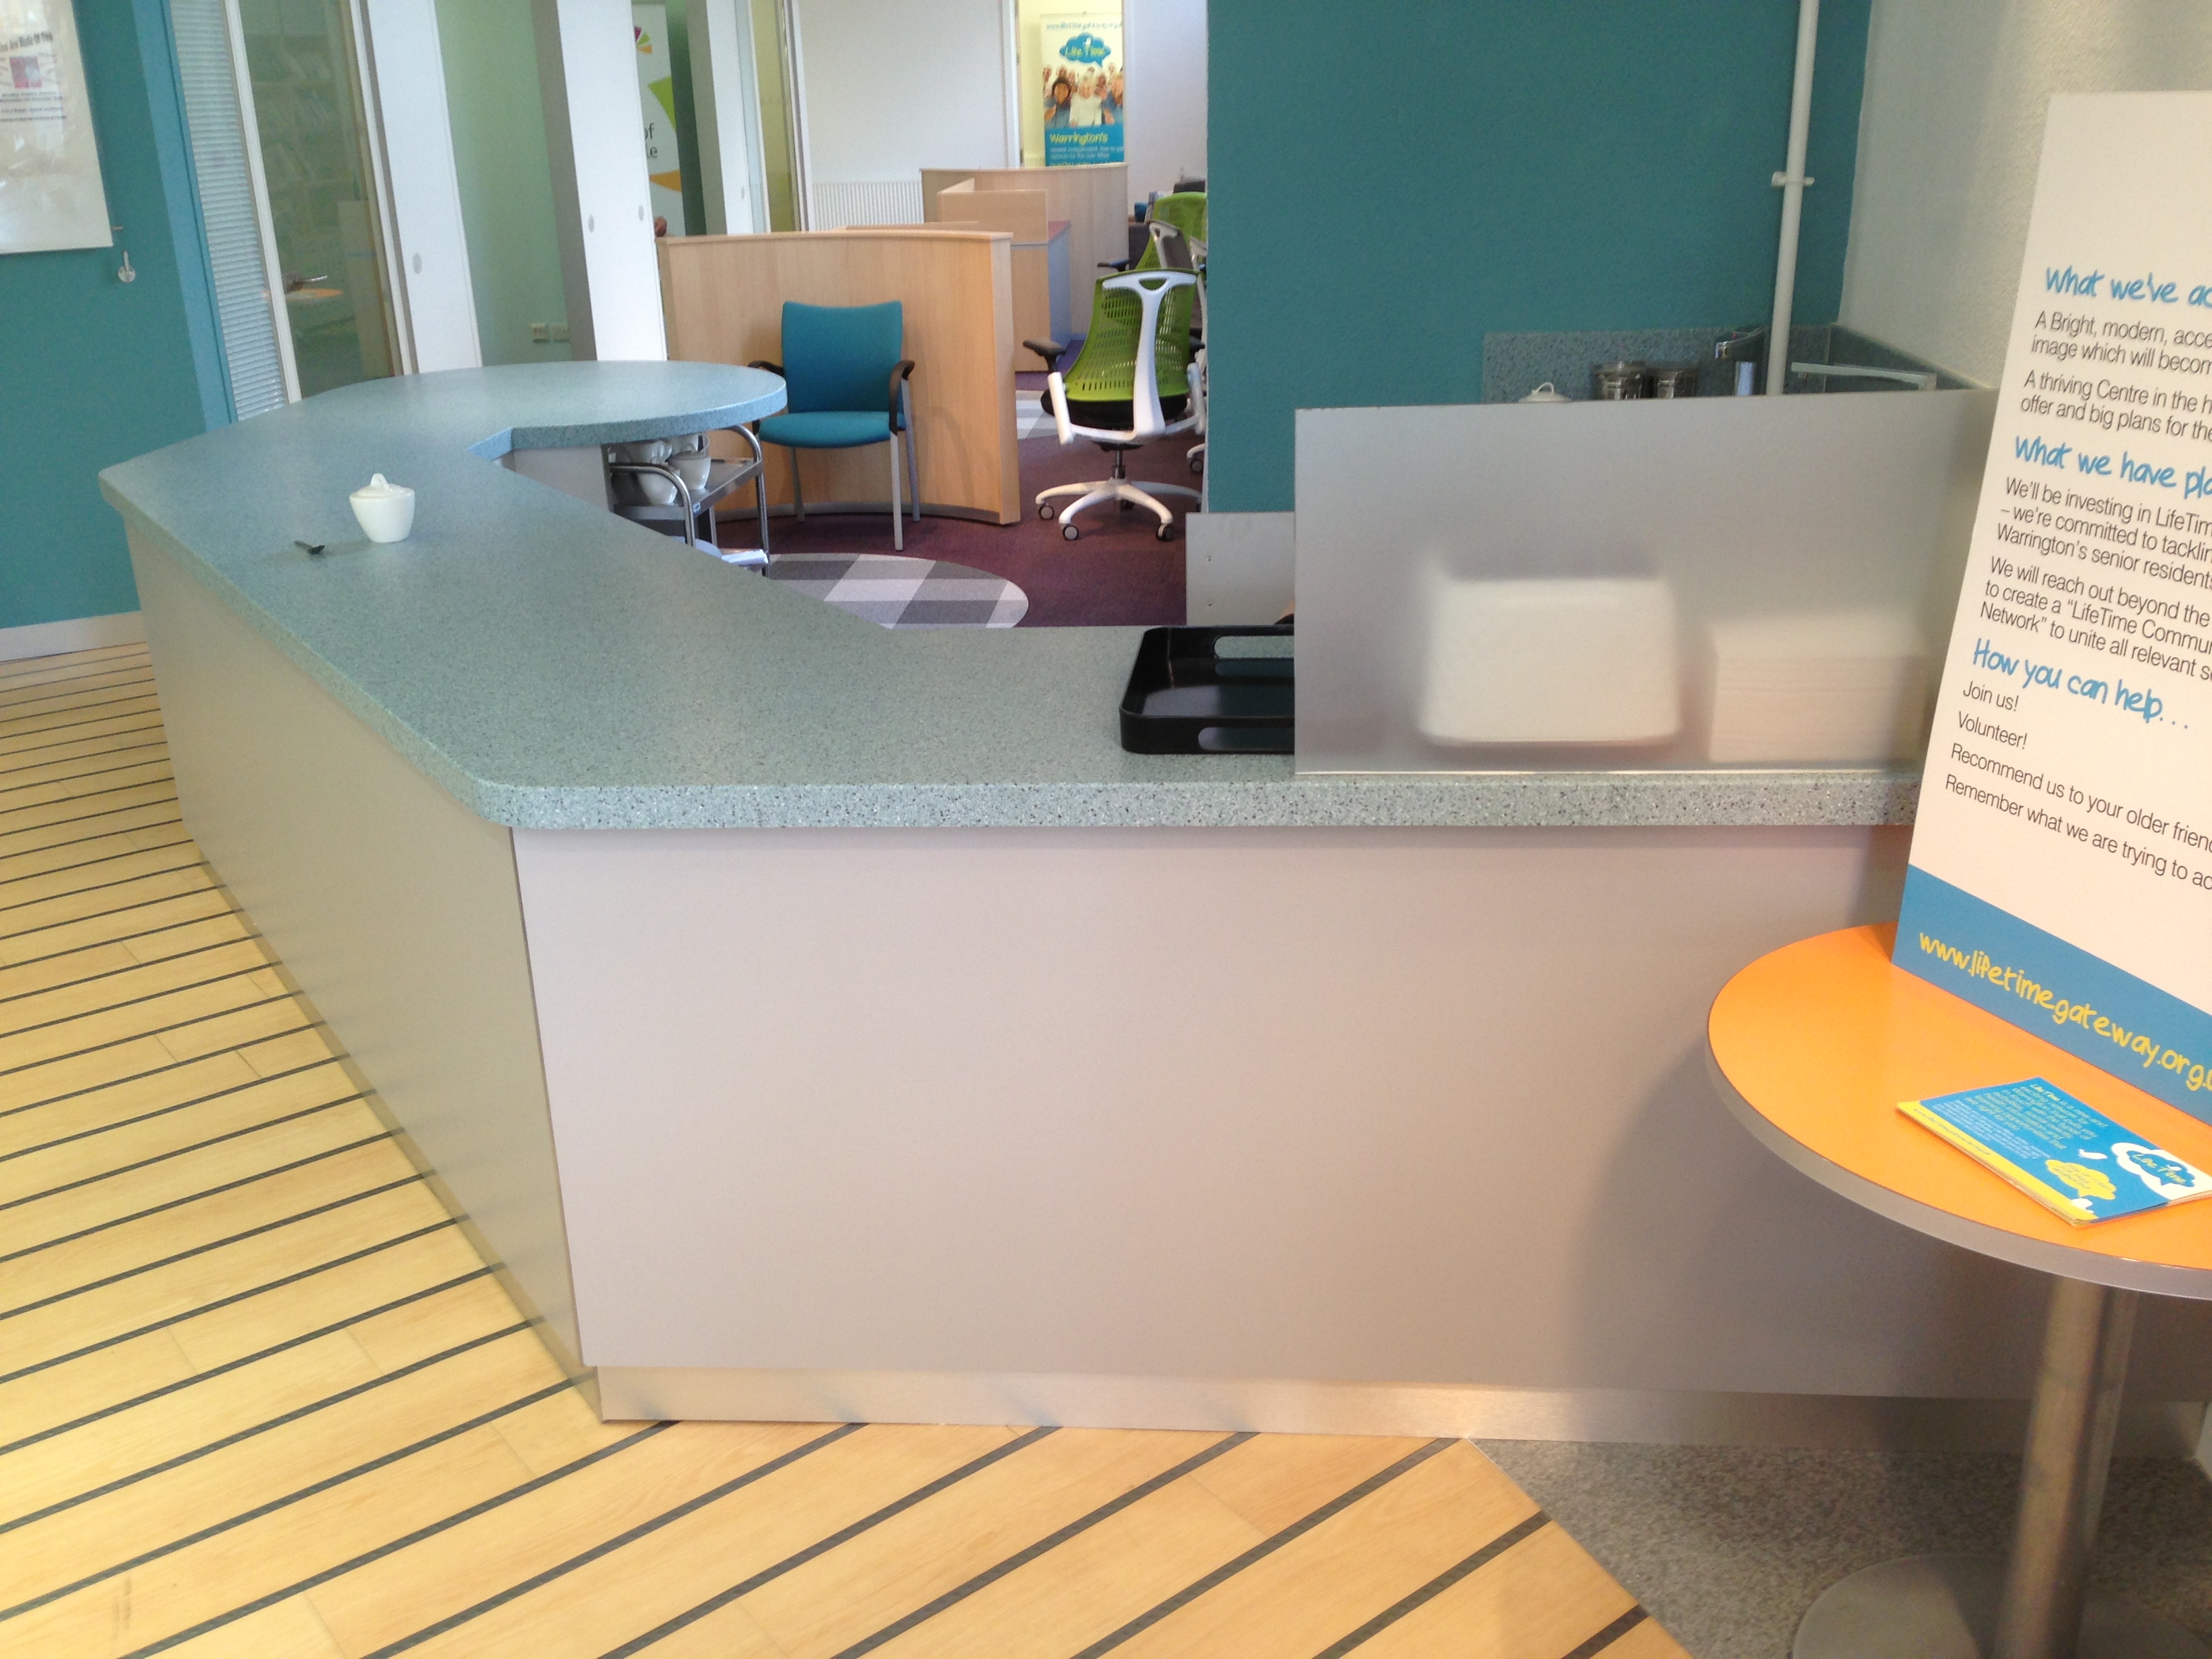 Coffee bar reception – Warrington Fascia made up in Mr Mdf with steel formica laminate, plinth made from stainless steel